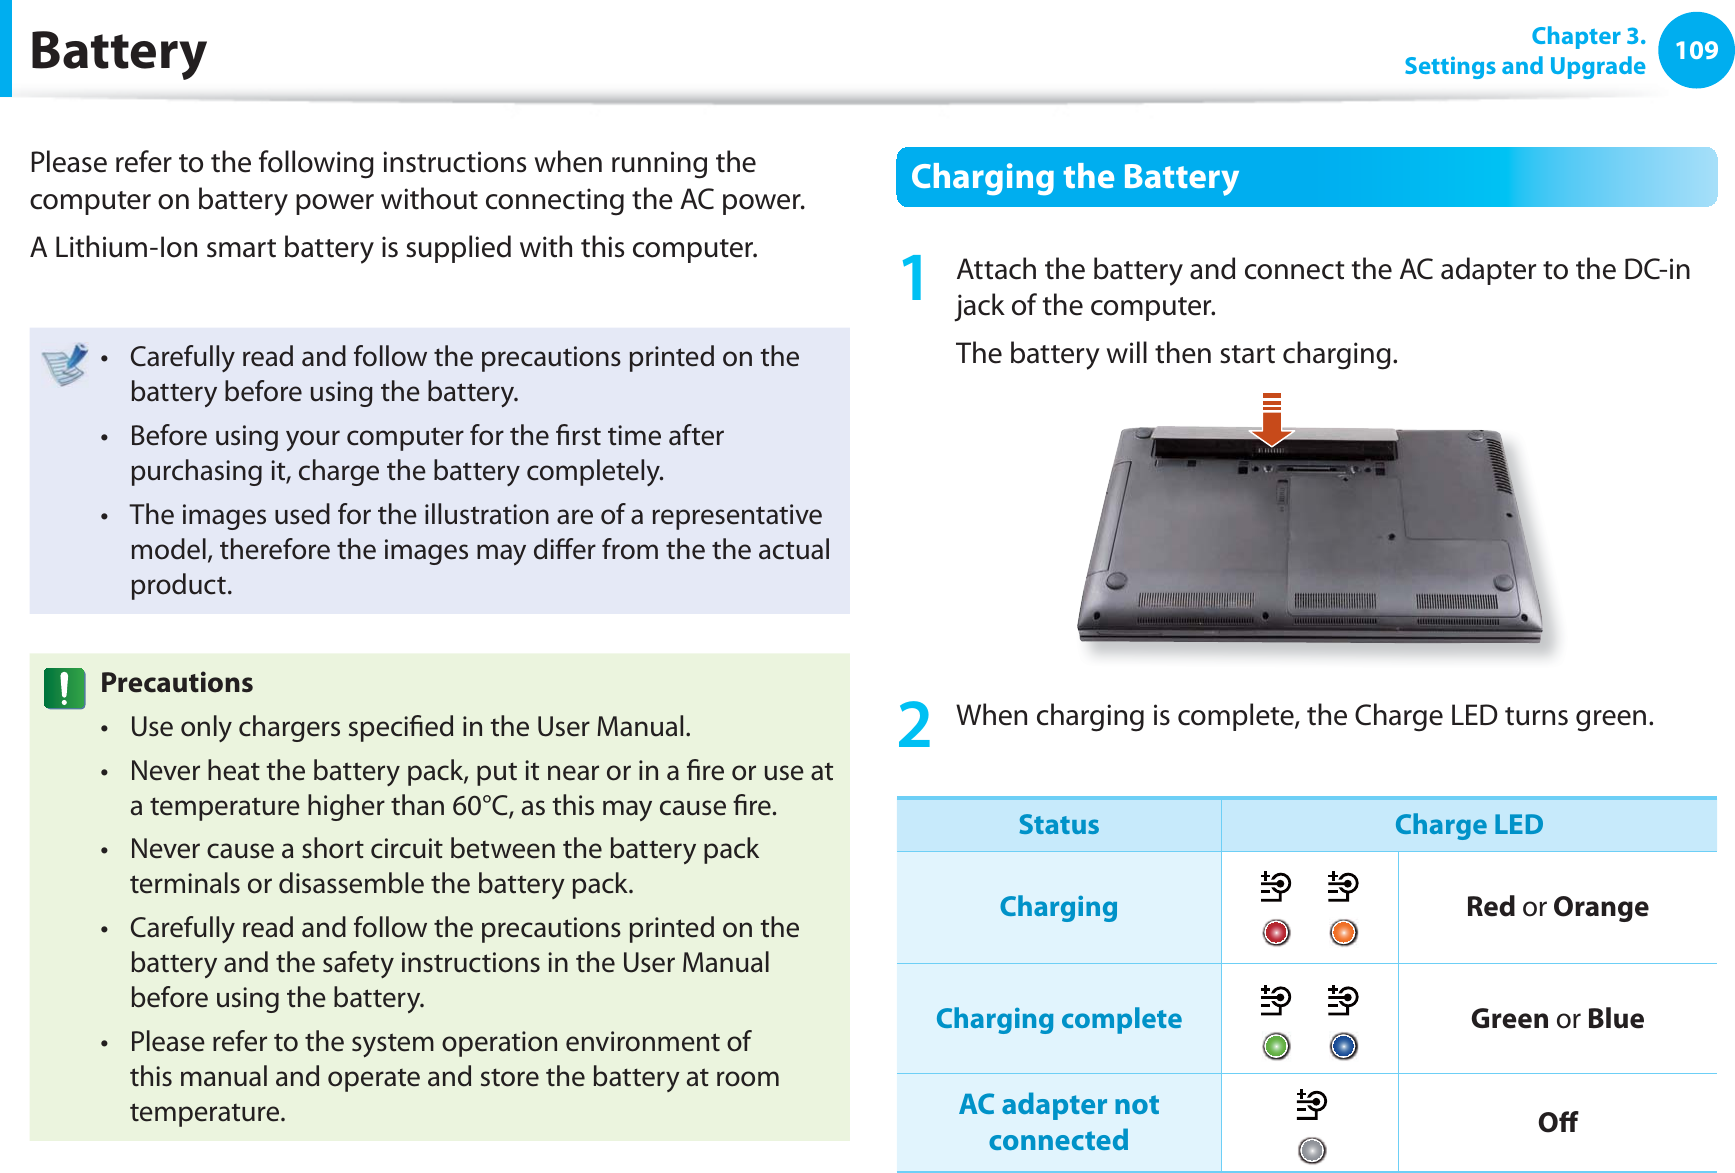 109 Chapter  3.Settings and Upgrade BatteryPlease refer to the following instructions when running the computer on battery power without connecting the AC power. A Lithium-Ion smart battery is supplied with this computer.Carefully read and follow the precautions printed on the t battery before using the battery.Before using your computer for the ﬁ rst time after t purchasing it, charge the battery completely.The images used for the illustration are of a representative t model, therefore the images may diﬀ er from the the actual product.  PrecautionsUse only chargers speciﬁ ed in the User Manual.t Never heat the battery pack, put it near or in a ﬁ re or use at t a temperature higher than 60°C, as this may cause ﬁ re.Never cause a short circuit between the battery pack t terminals or disassemble the battery pack. Carefully read and follow the precautions printed on the t battery and the safety instructions in the User Manual before using the battery.Please refer to the system operation environment of t this manual and operate and store the battery at room temperature. Charging the Battery1  Attach the battery and connect the AC adapter to the DC-in jack of the computer.The battery will then start charging.2  When charging is complete, the Charge LED turns green.Status Charge LEDCharging Red or OrangeCharging complete Green or BlueAC adapter not connected Oﬀ 